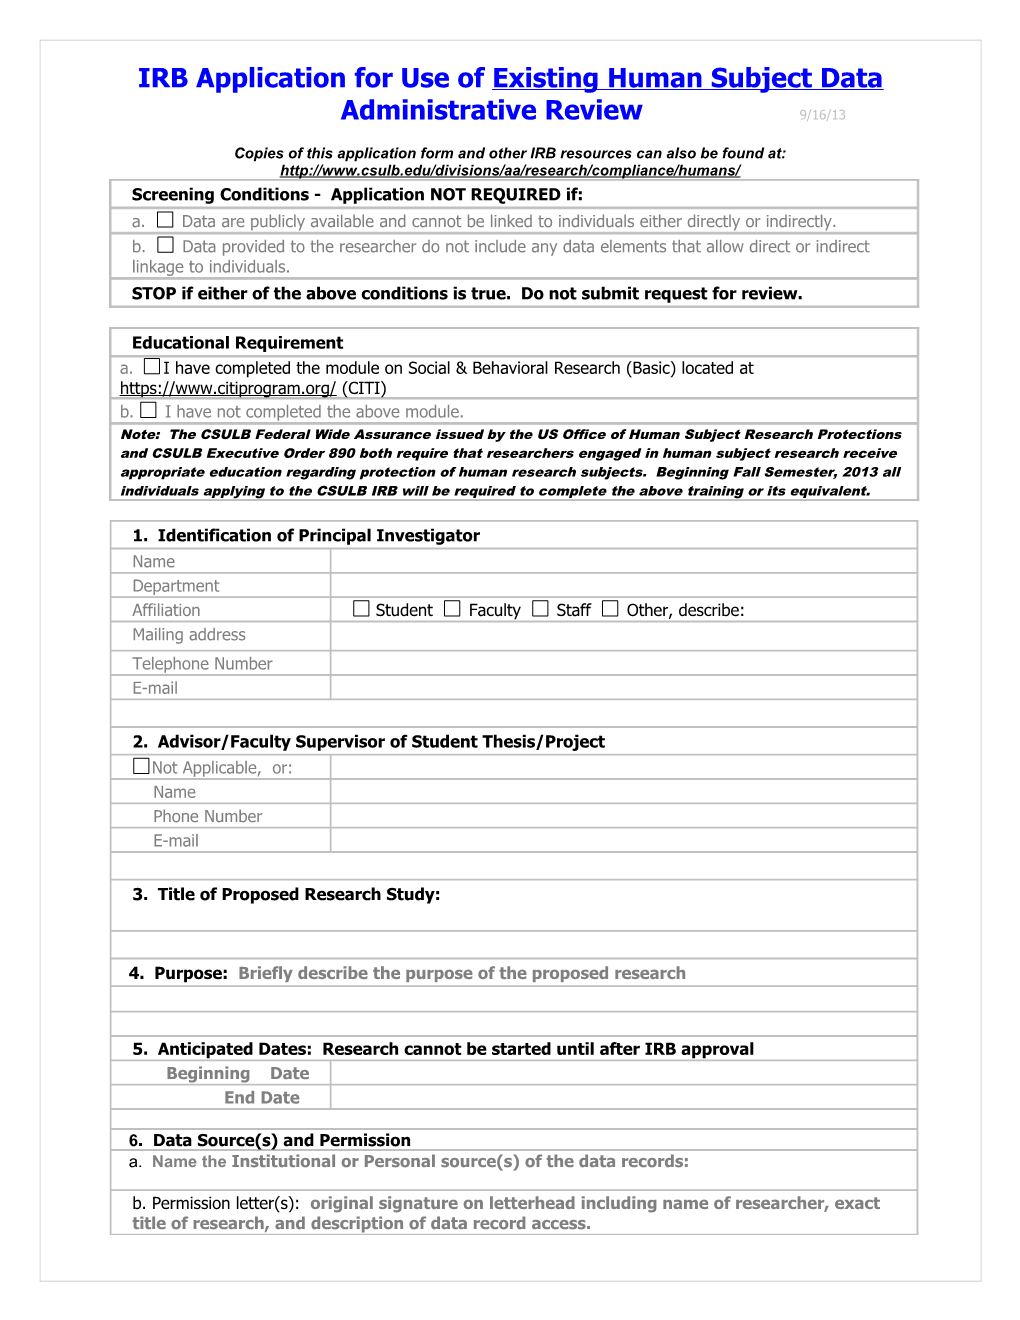 IRB Application For Use Of Existing Data – Administrative Review